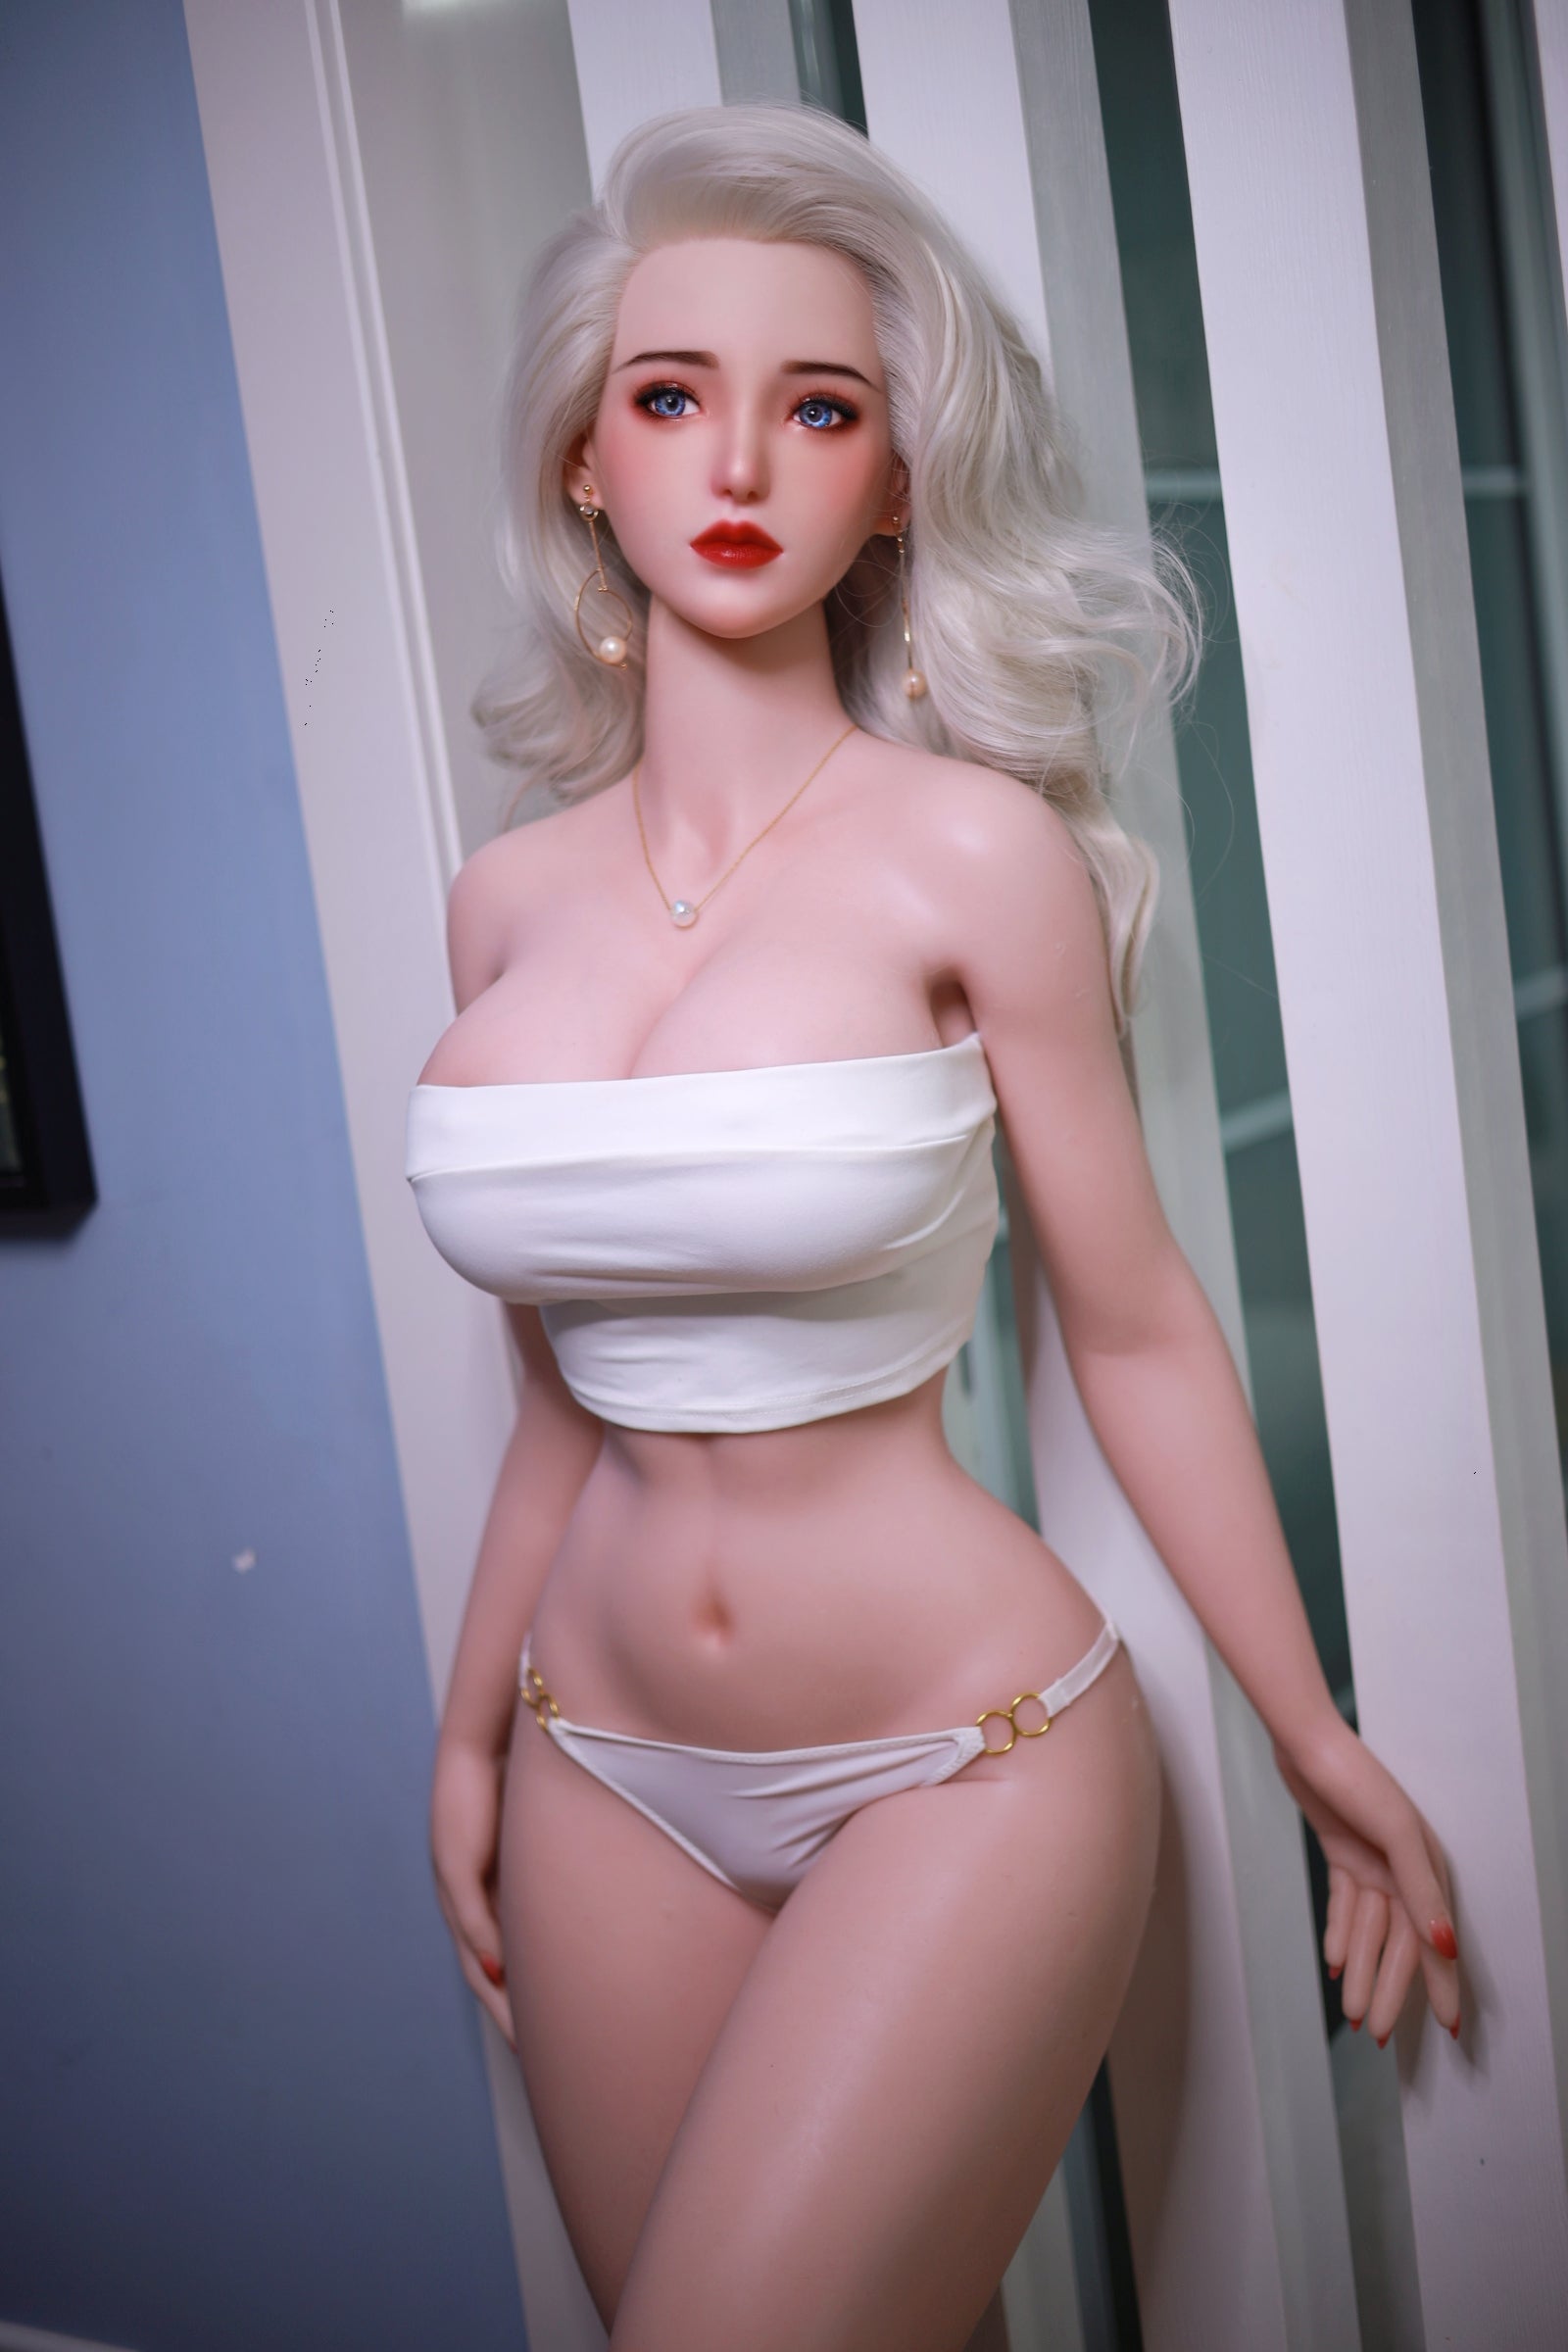 JY Doll 161 cm Silicone - Xing he | Buy Sex Dolls at DOLLS ACTUALLY